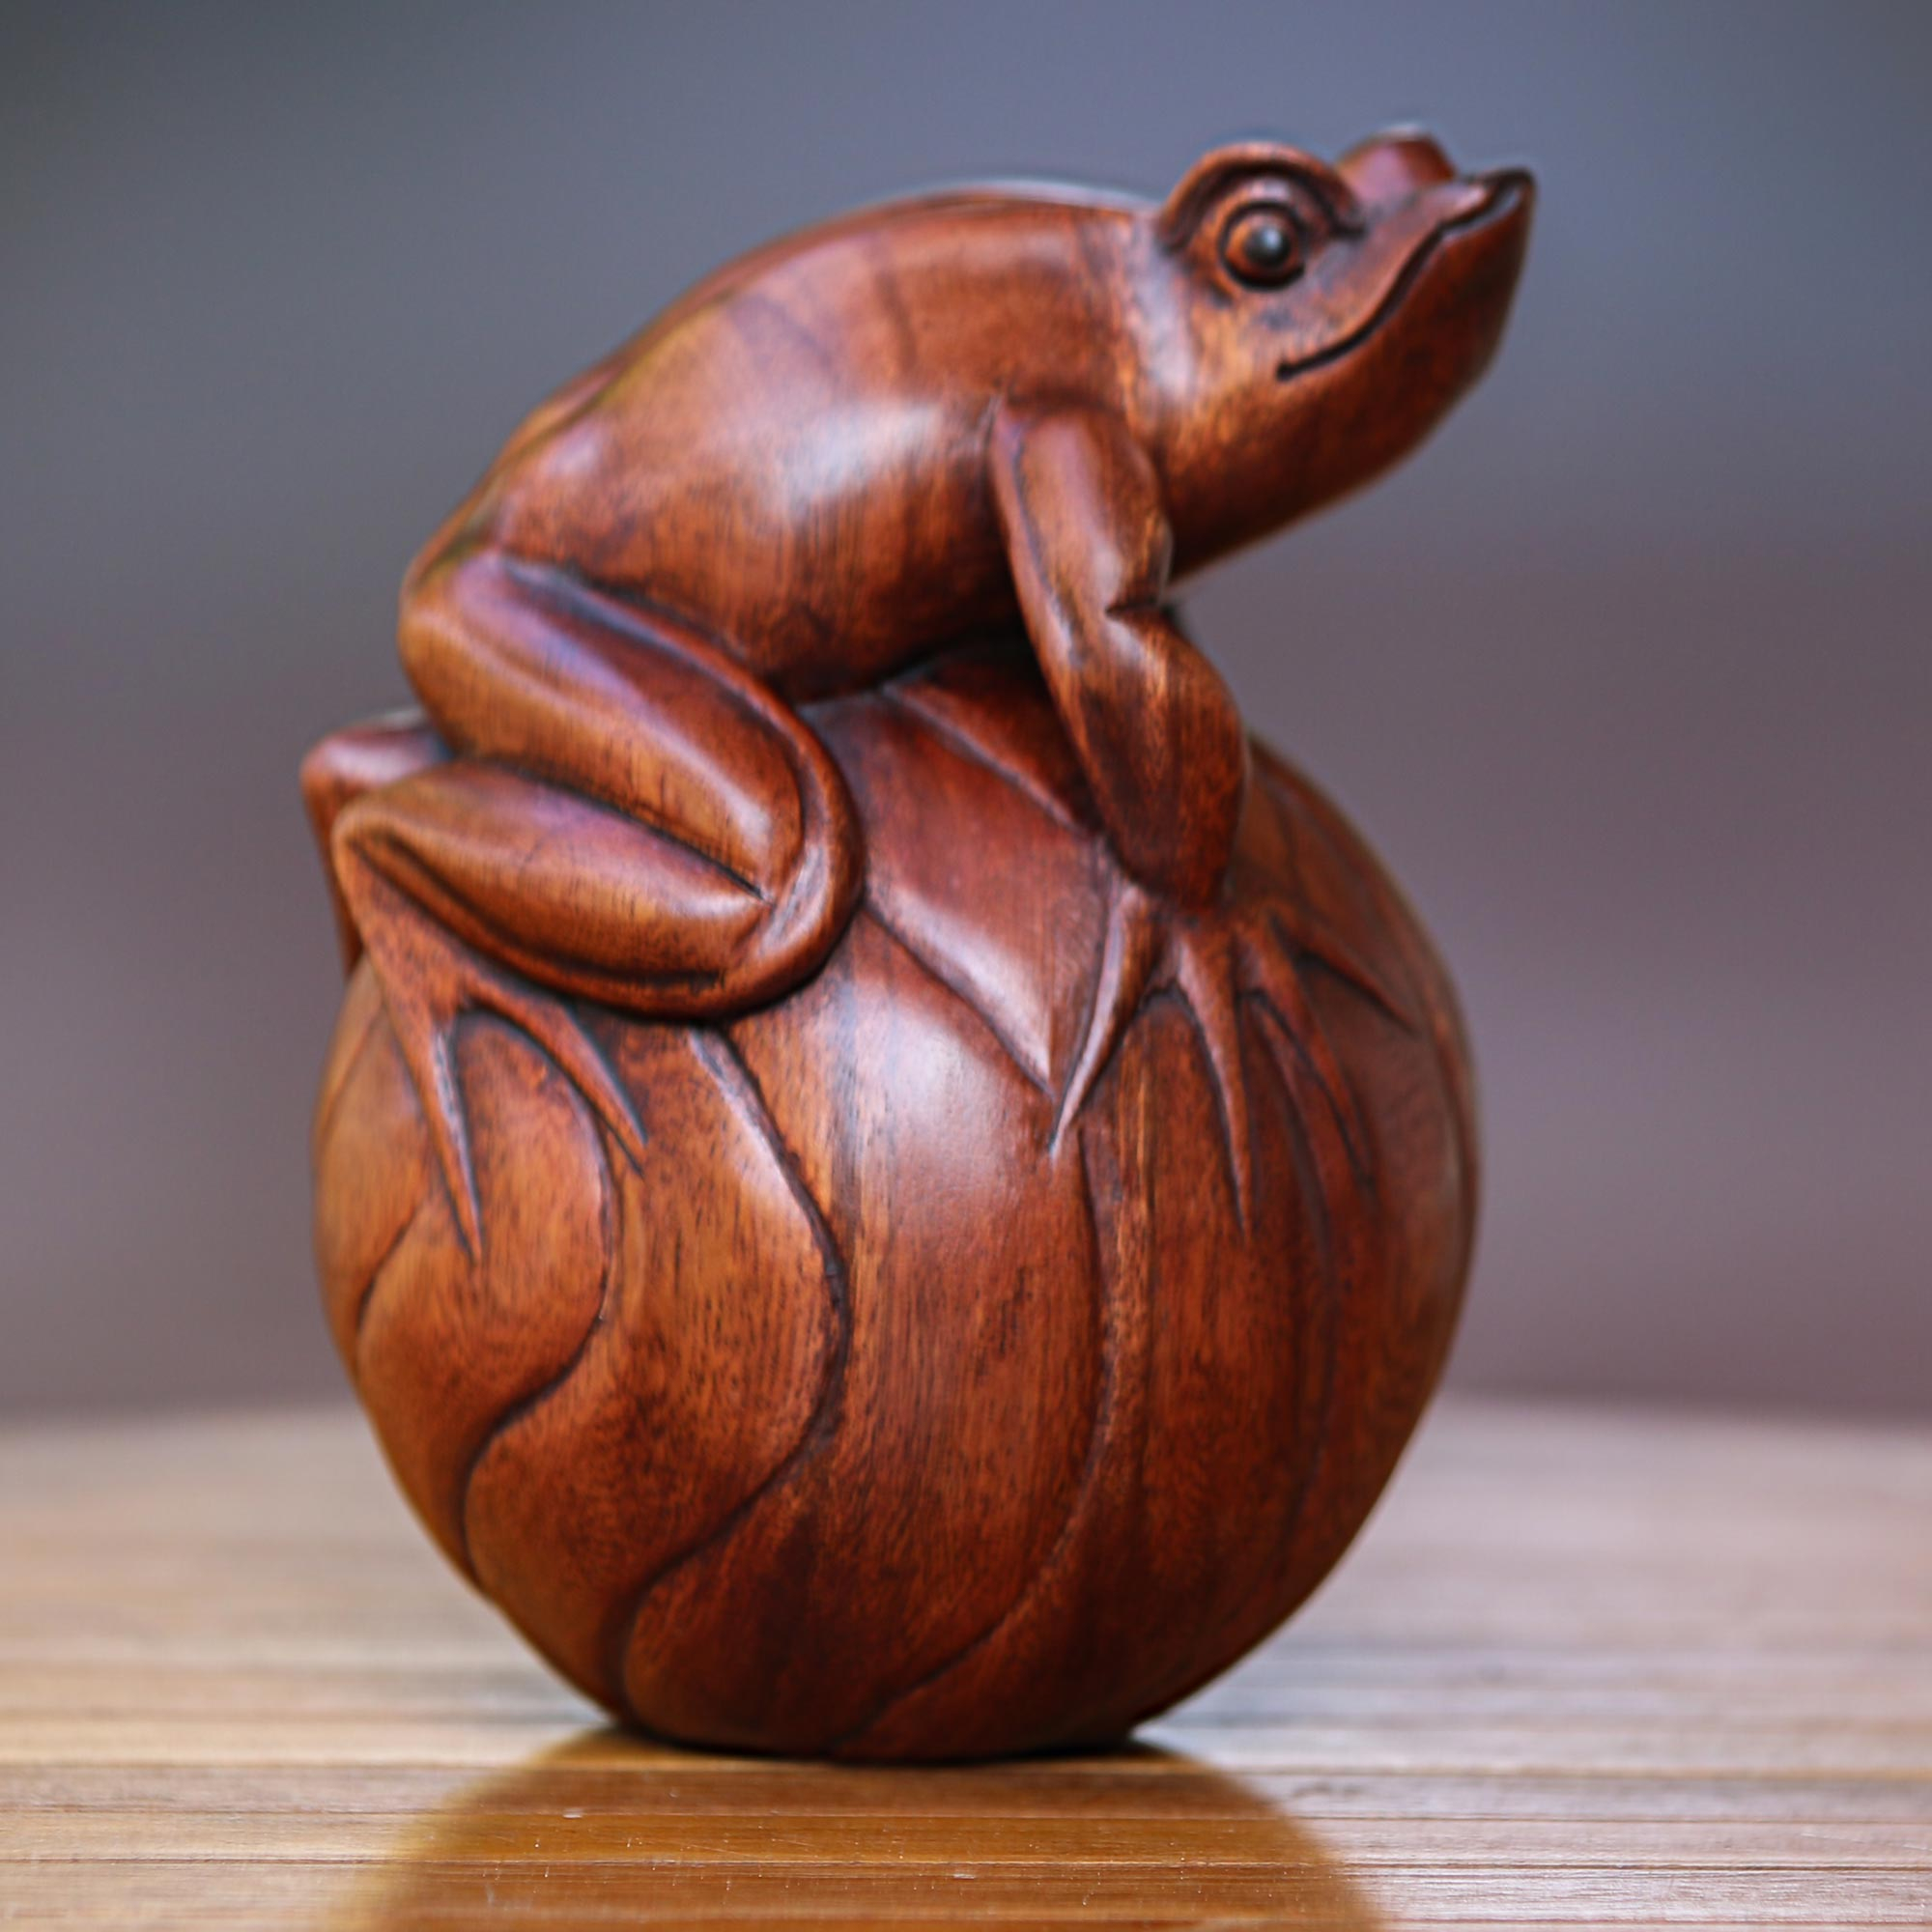 Hand-Carved Suar Wood Frog Figurine from Bali - Frog on a Ball